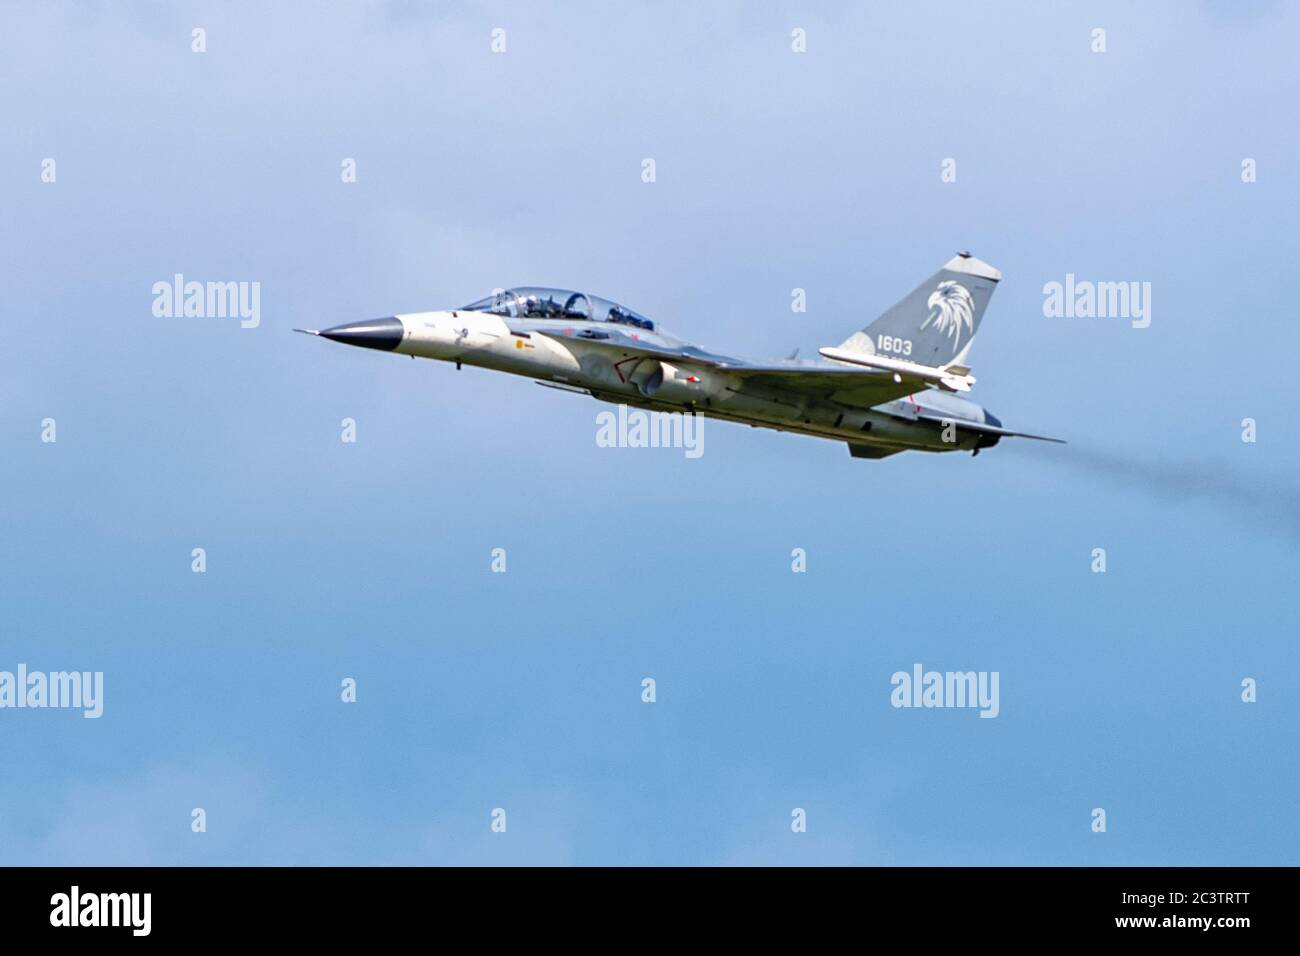 Taichung, Taiwan, June 22, 2020.  Taiwan’s first built fighter jet, the Ching-kuo Indigenous Defense Fighter (IDF). Credit: Henry Westheim Photography/Alamy Live News Stock Photo